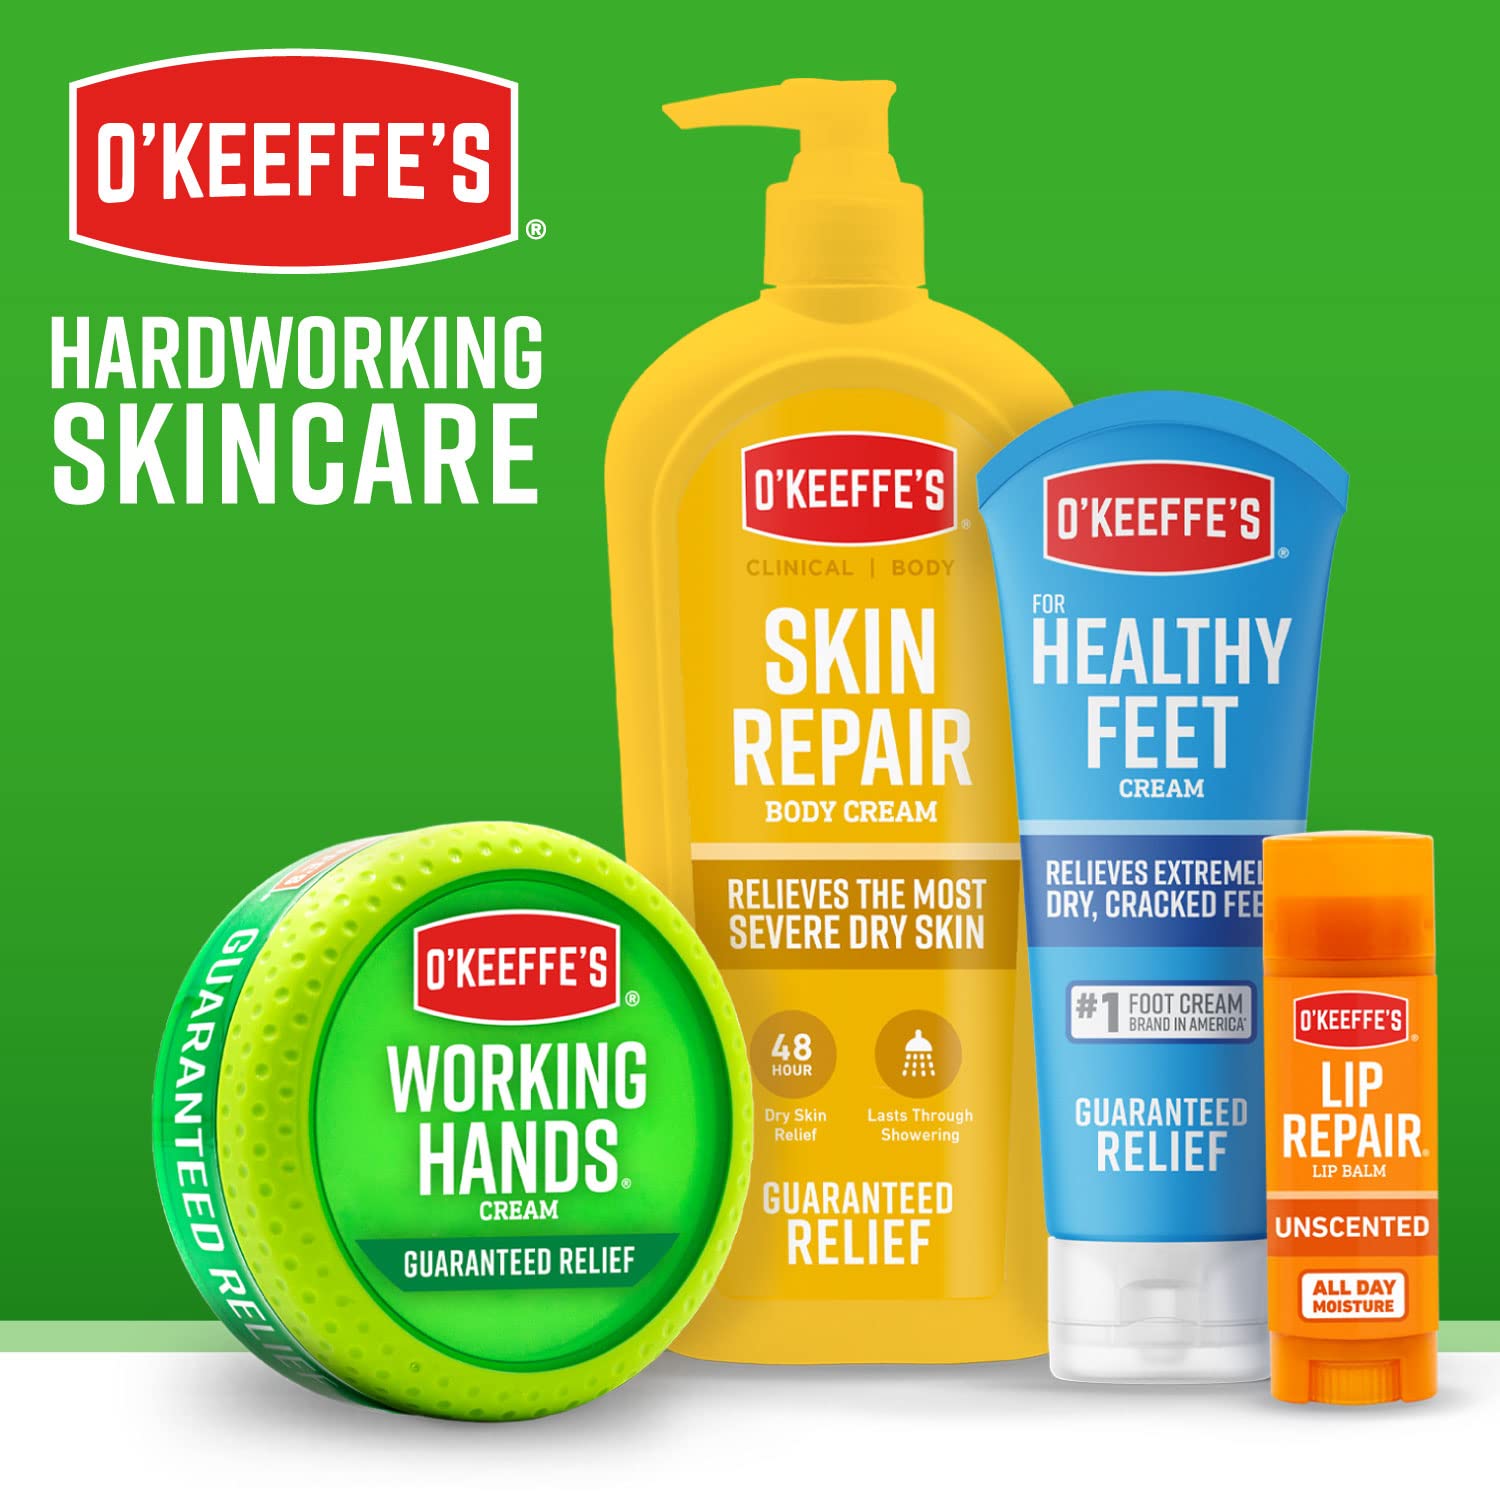 O'Keeffe's for Healthy Feet Foot Cream, Guaranteed Relief for Extremely Dry, Cracked Feet, Instantly Boosts Moisture Levels, 3.2 Ounce Jar, (Pack of 2)